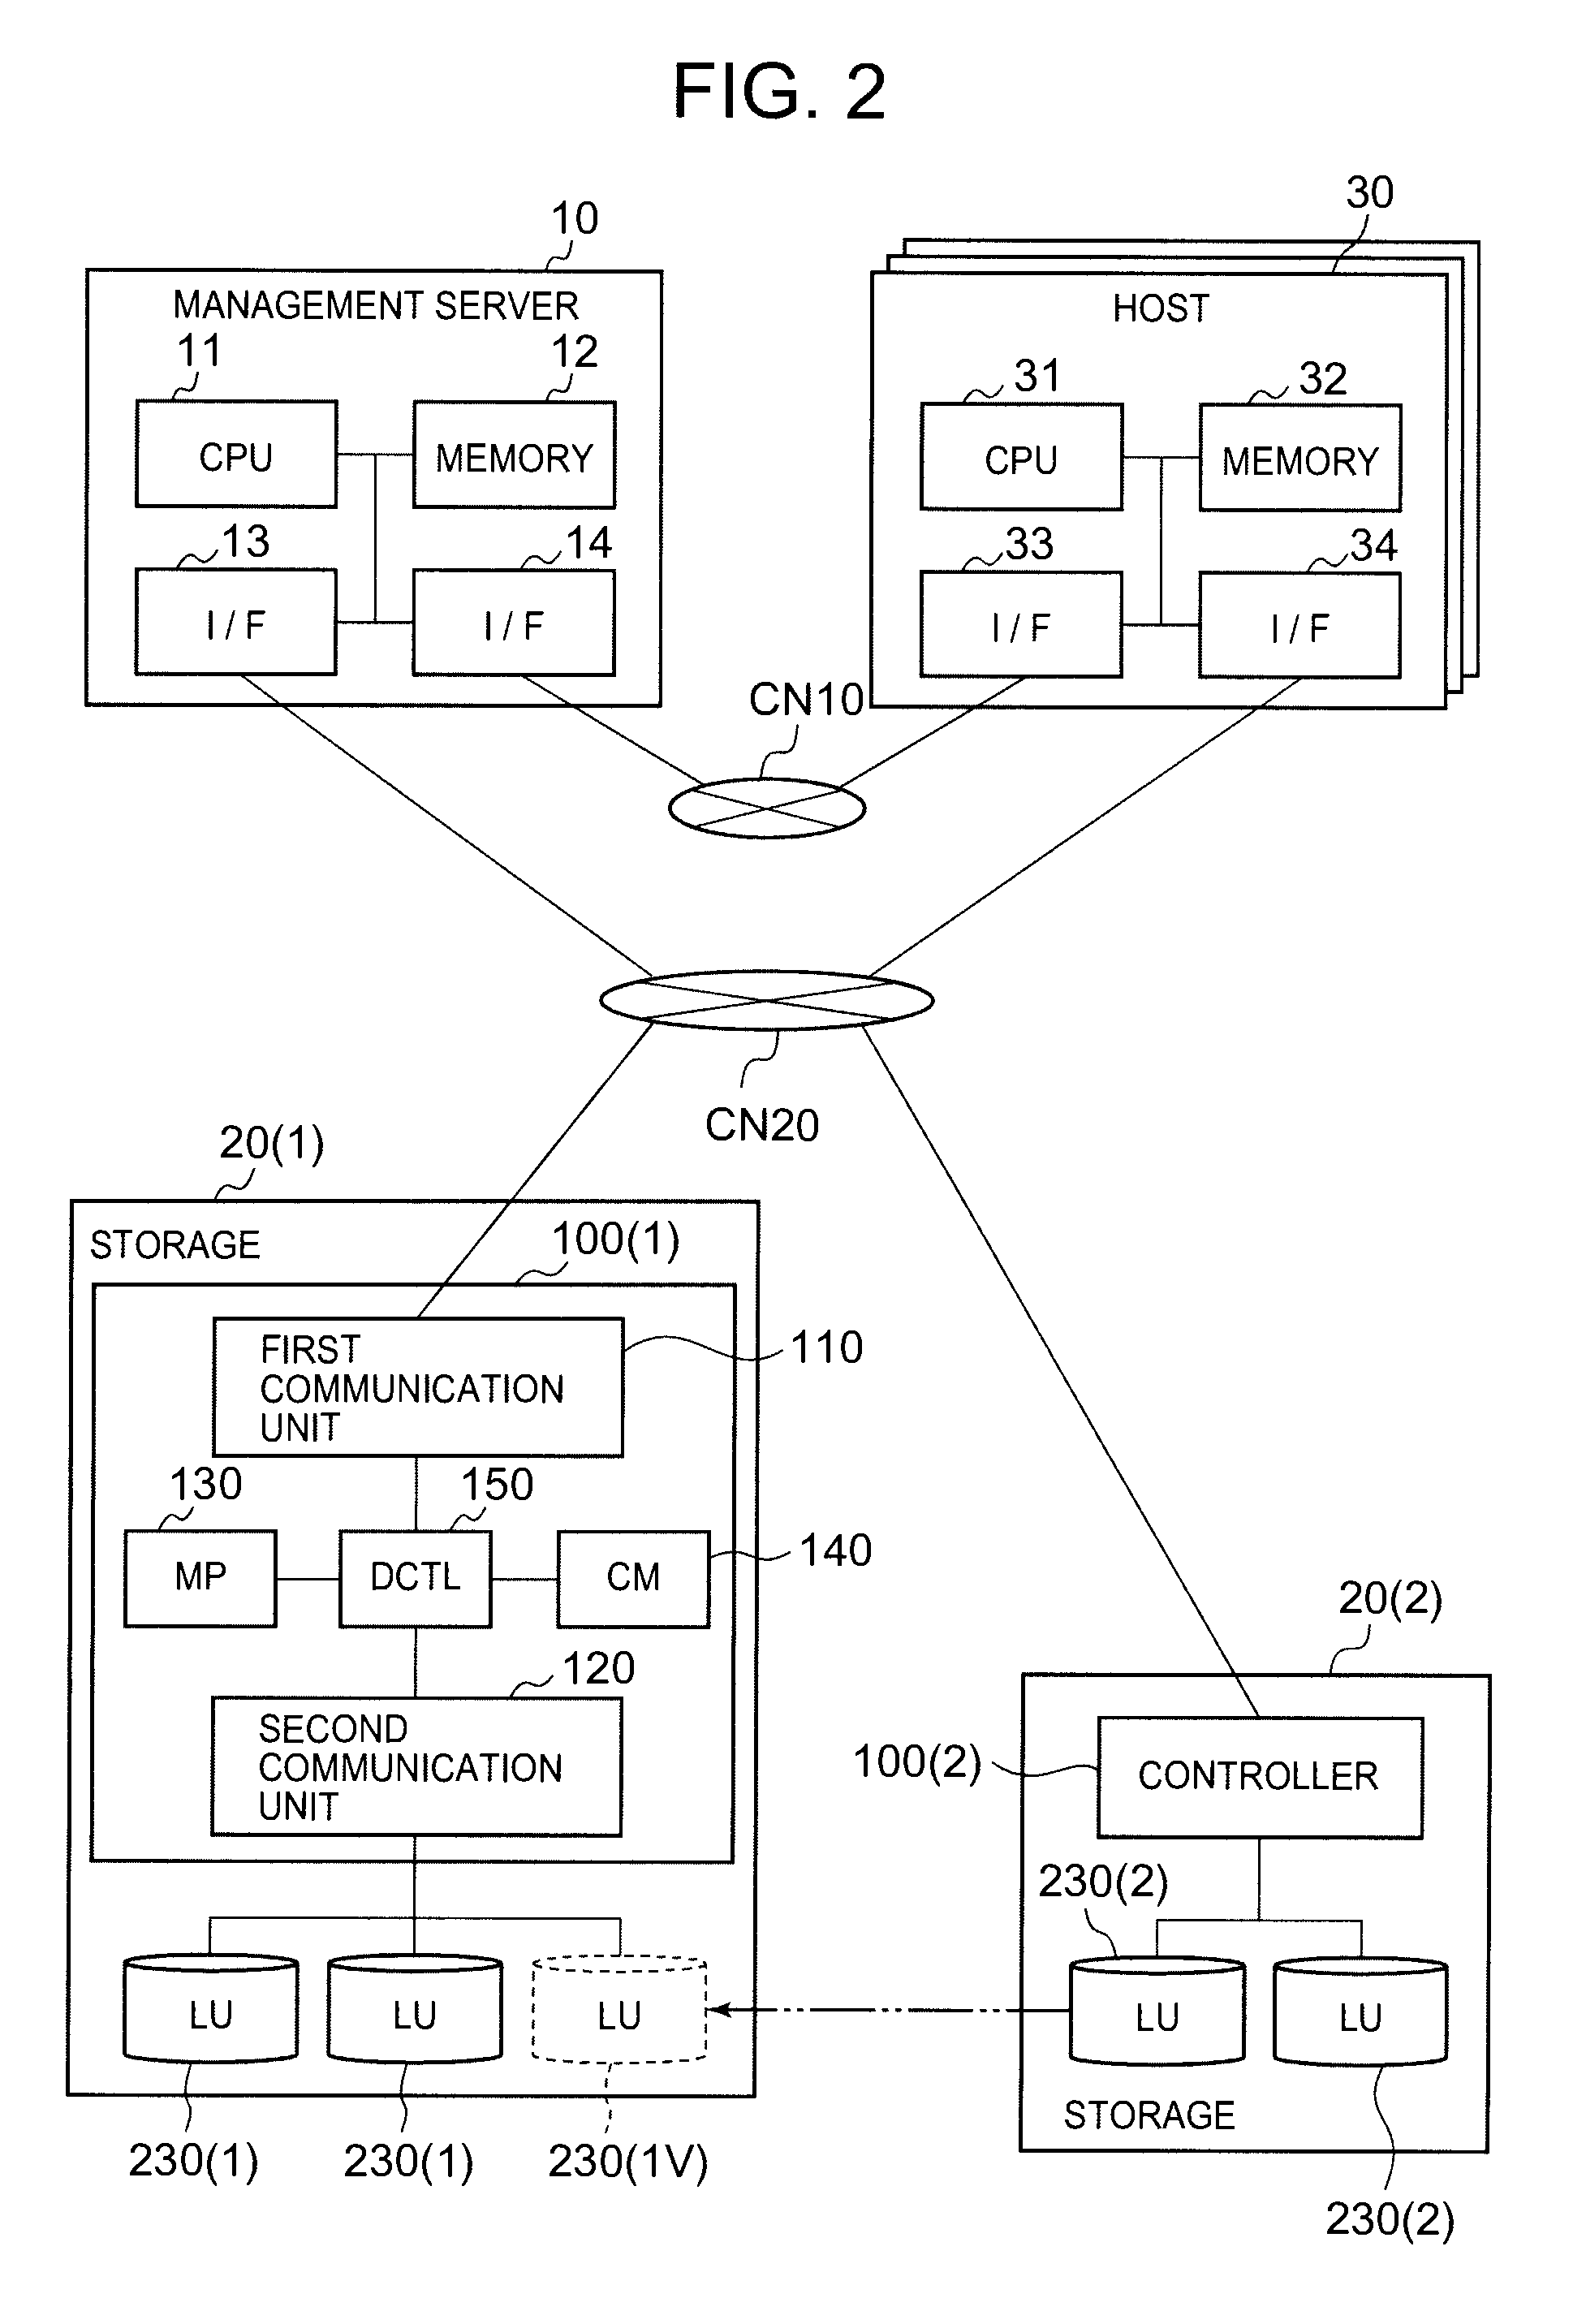 Data migration management apparatus and information processing system